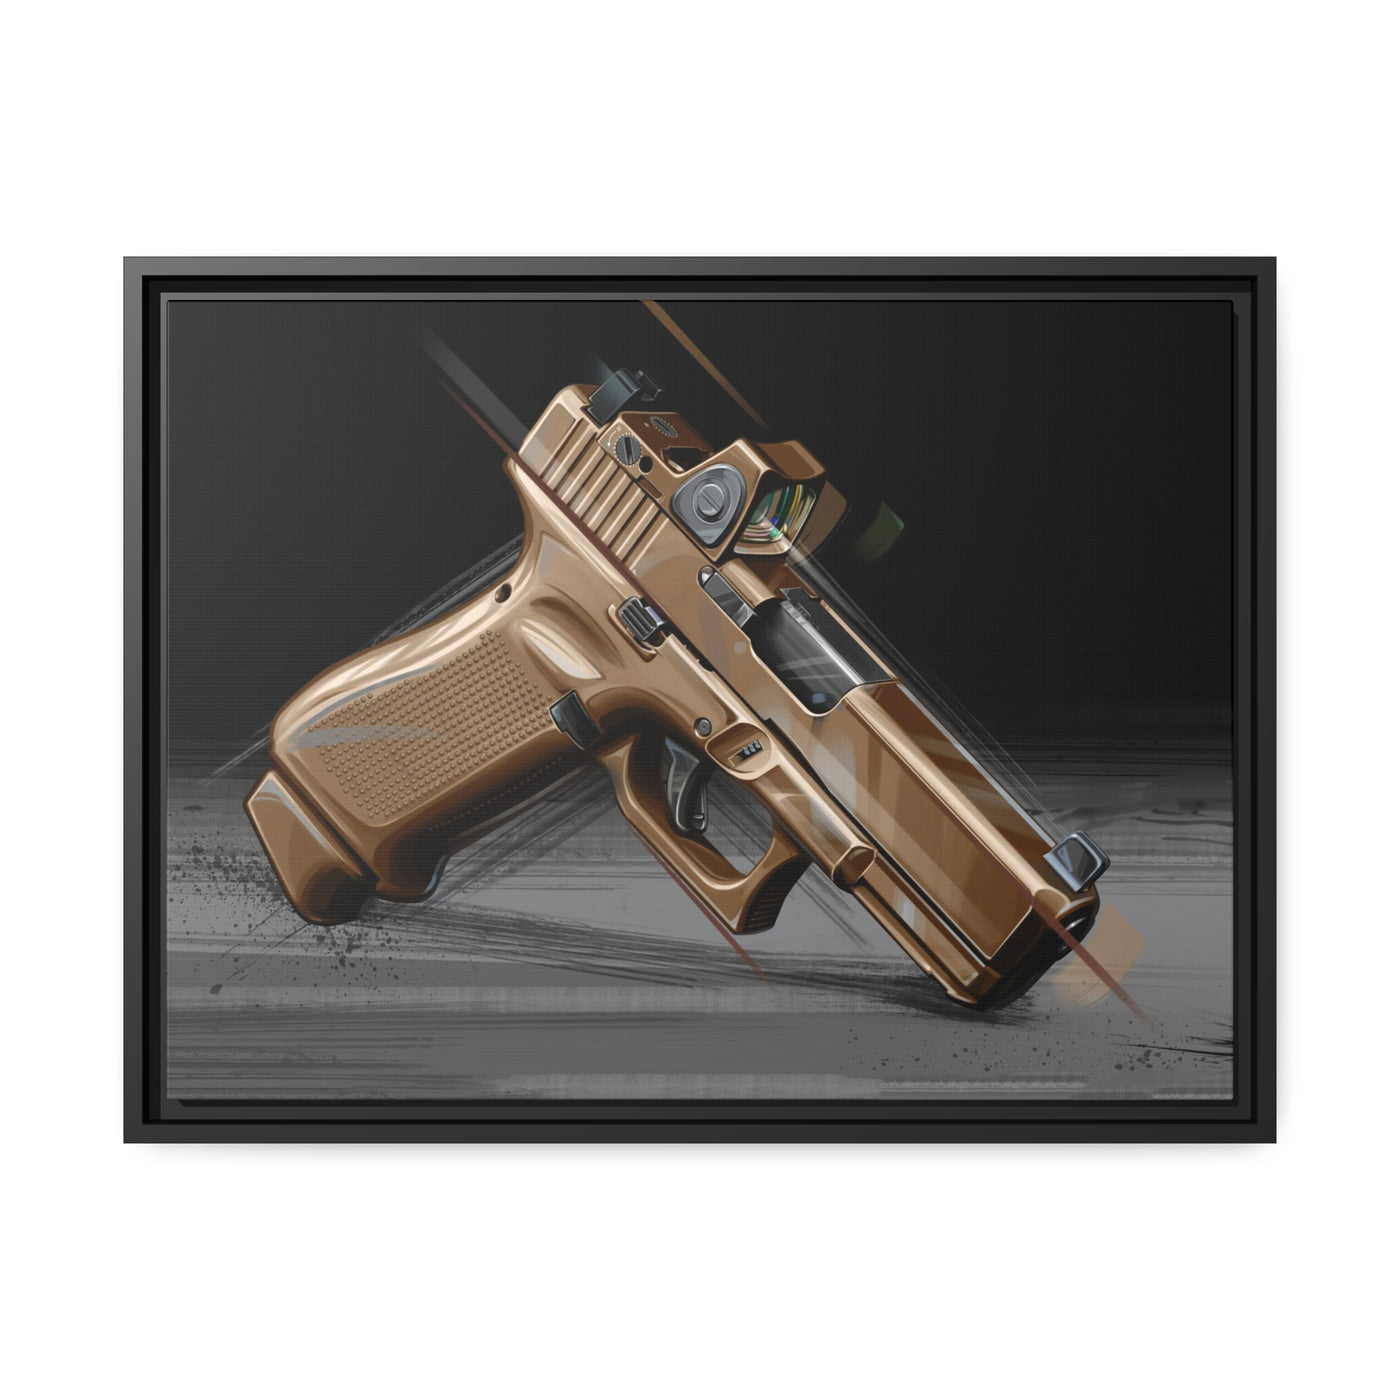 The Last Resort - OG Tan Poly Pistol Painting - Black Framed Wrapped Canvas - Value Collection